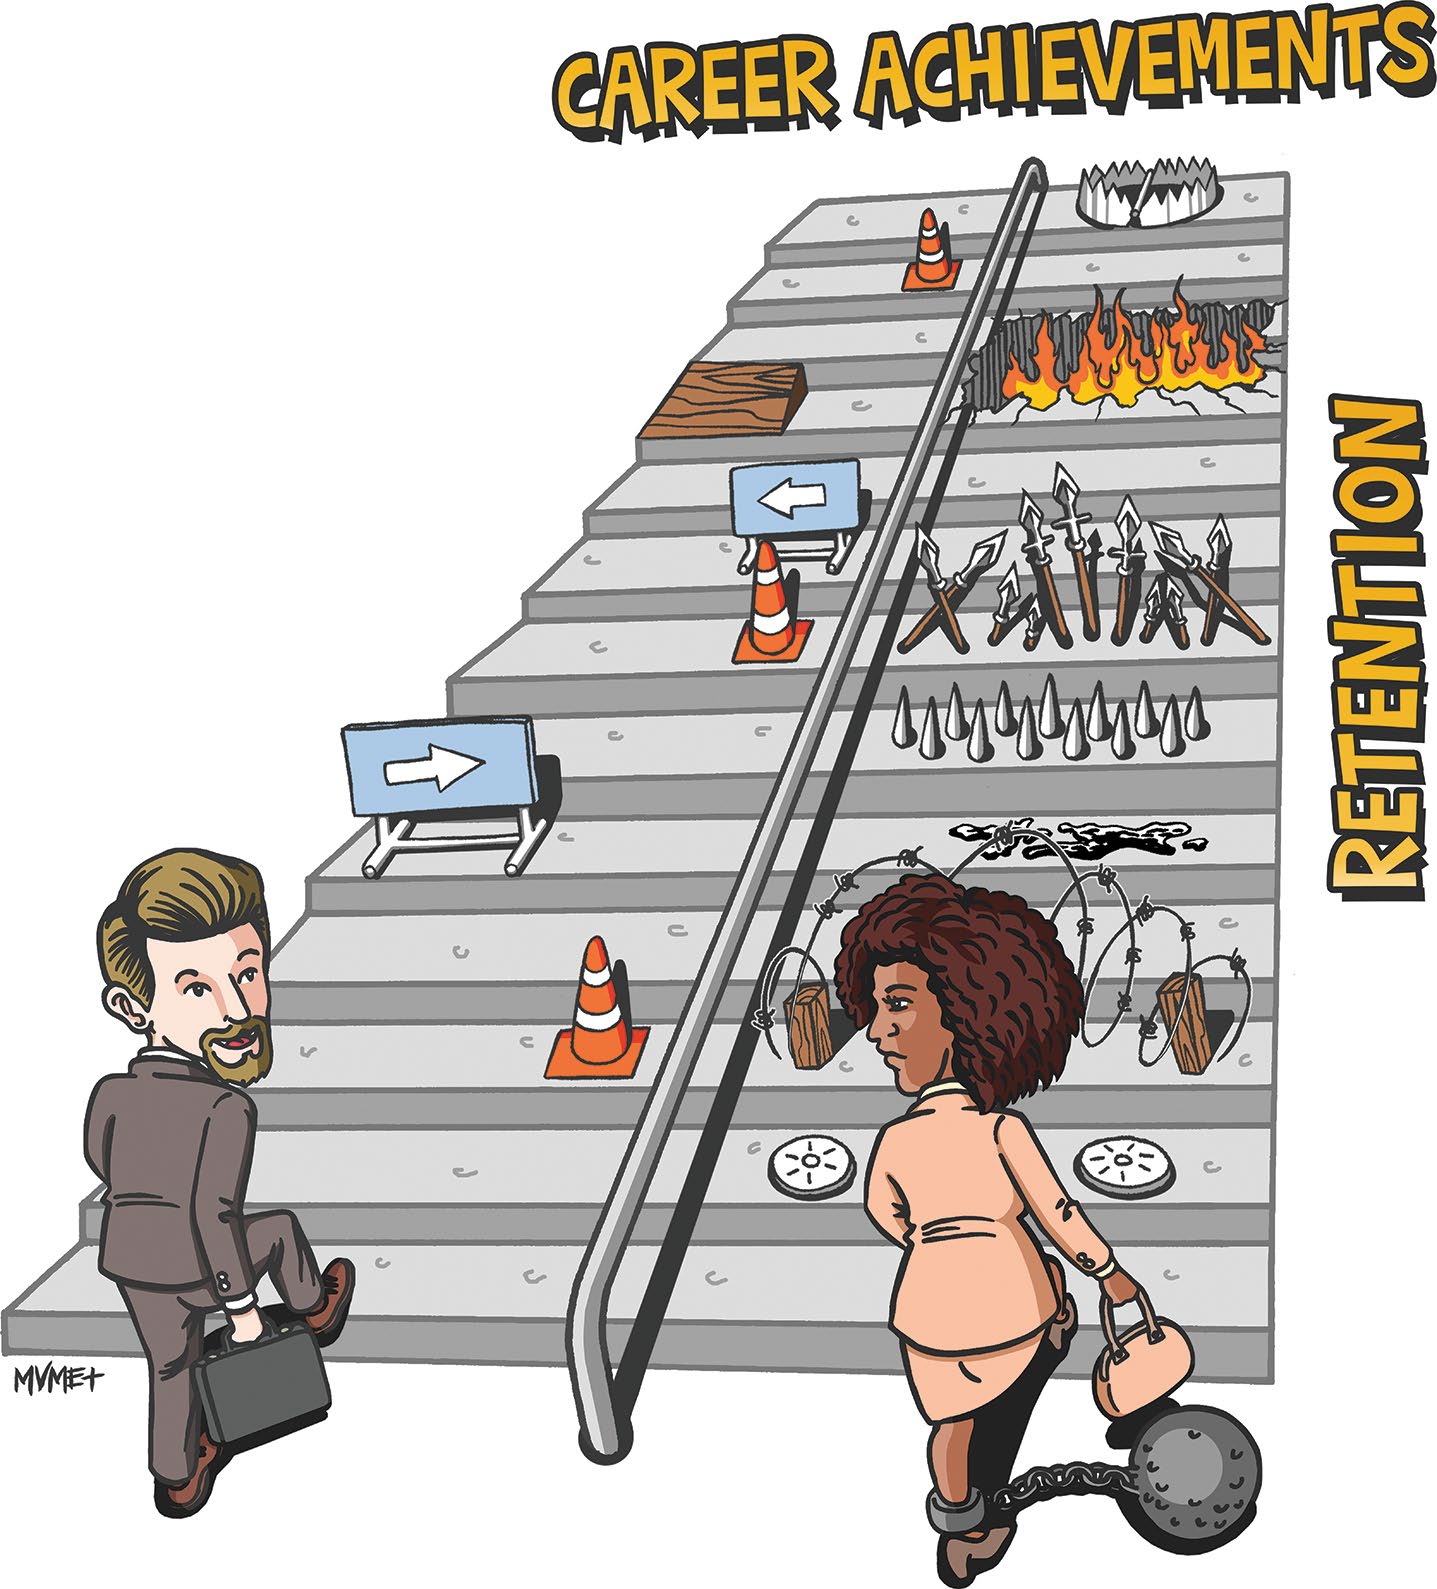 An illustration shows a white man and a Black woman climbing a staircase with various obstacles on their decent. The woman faces more obstacles